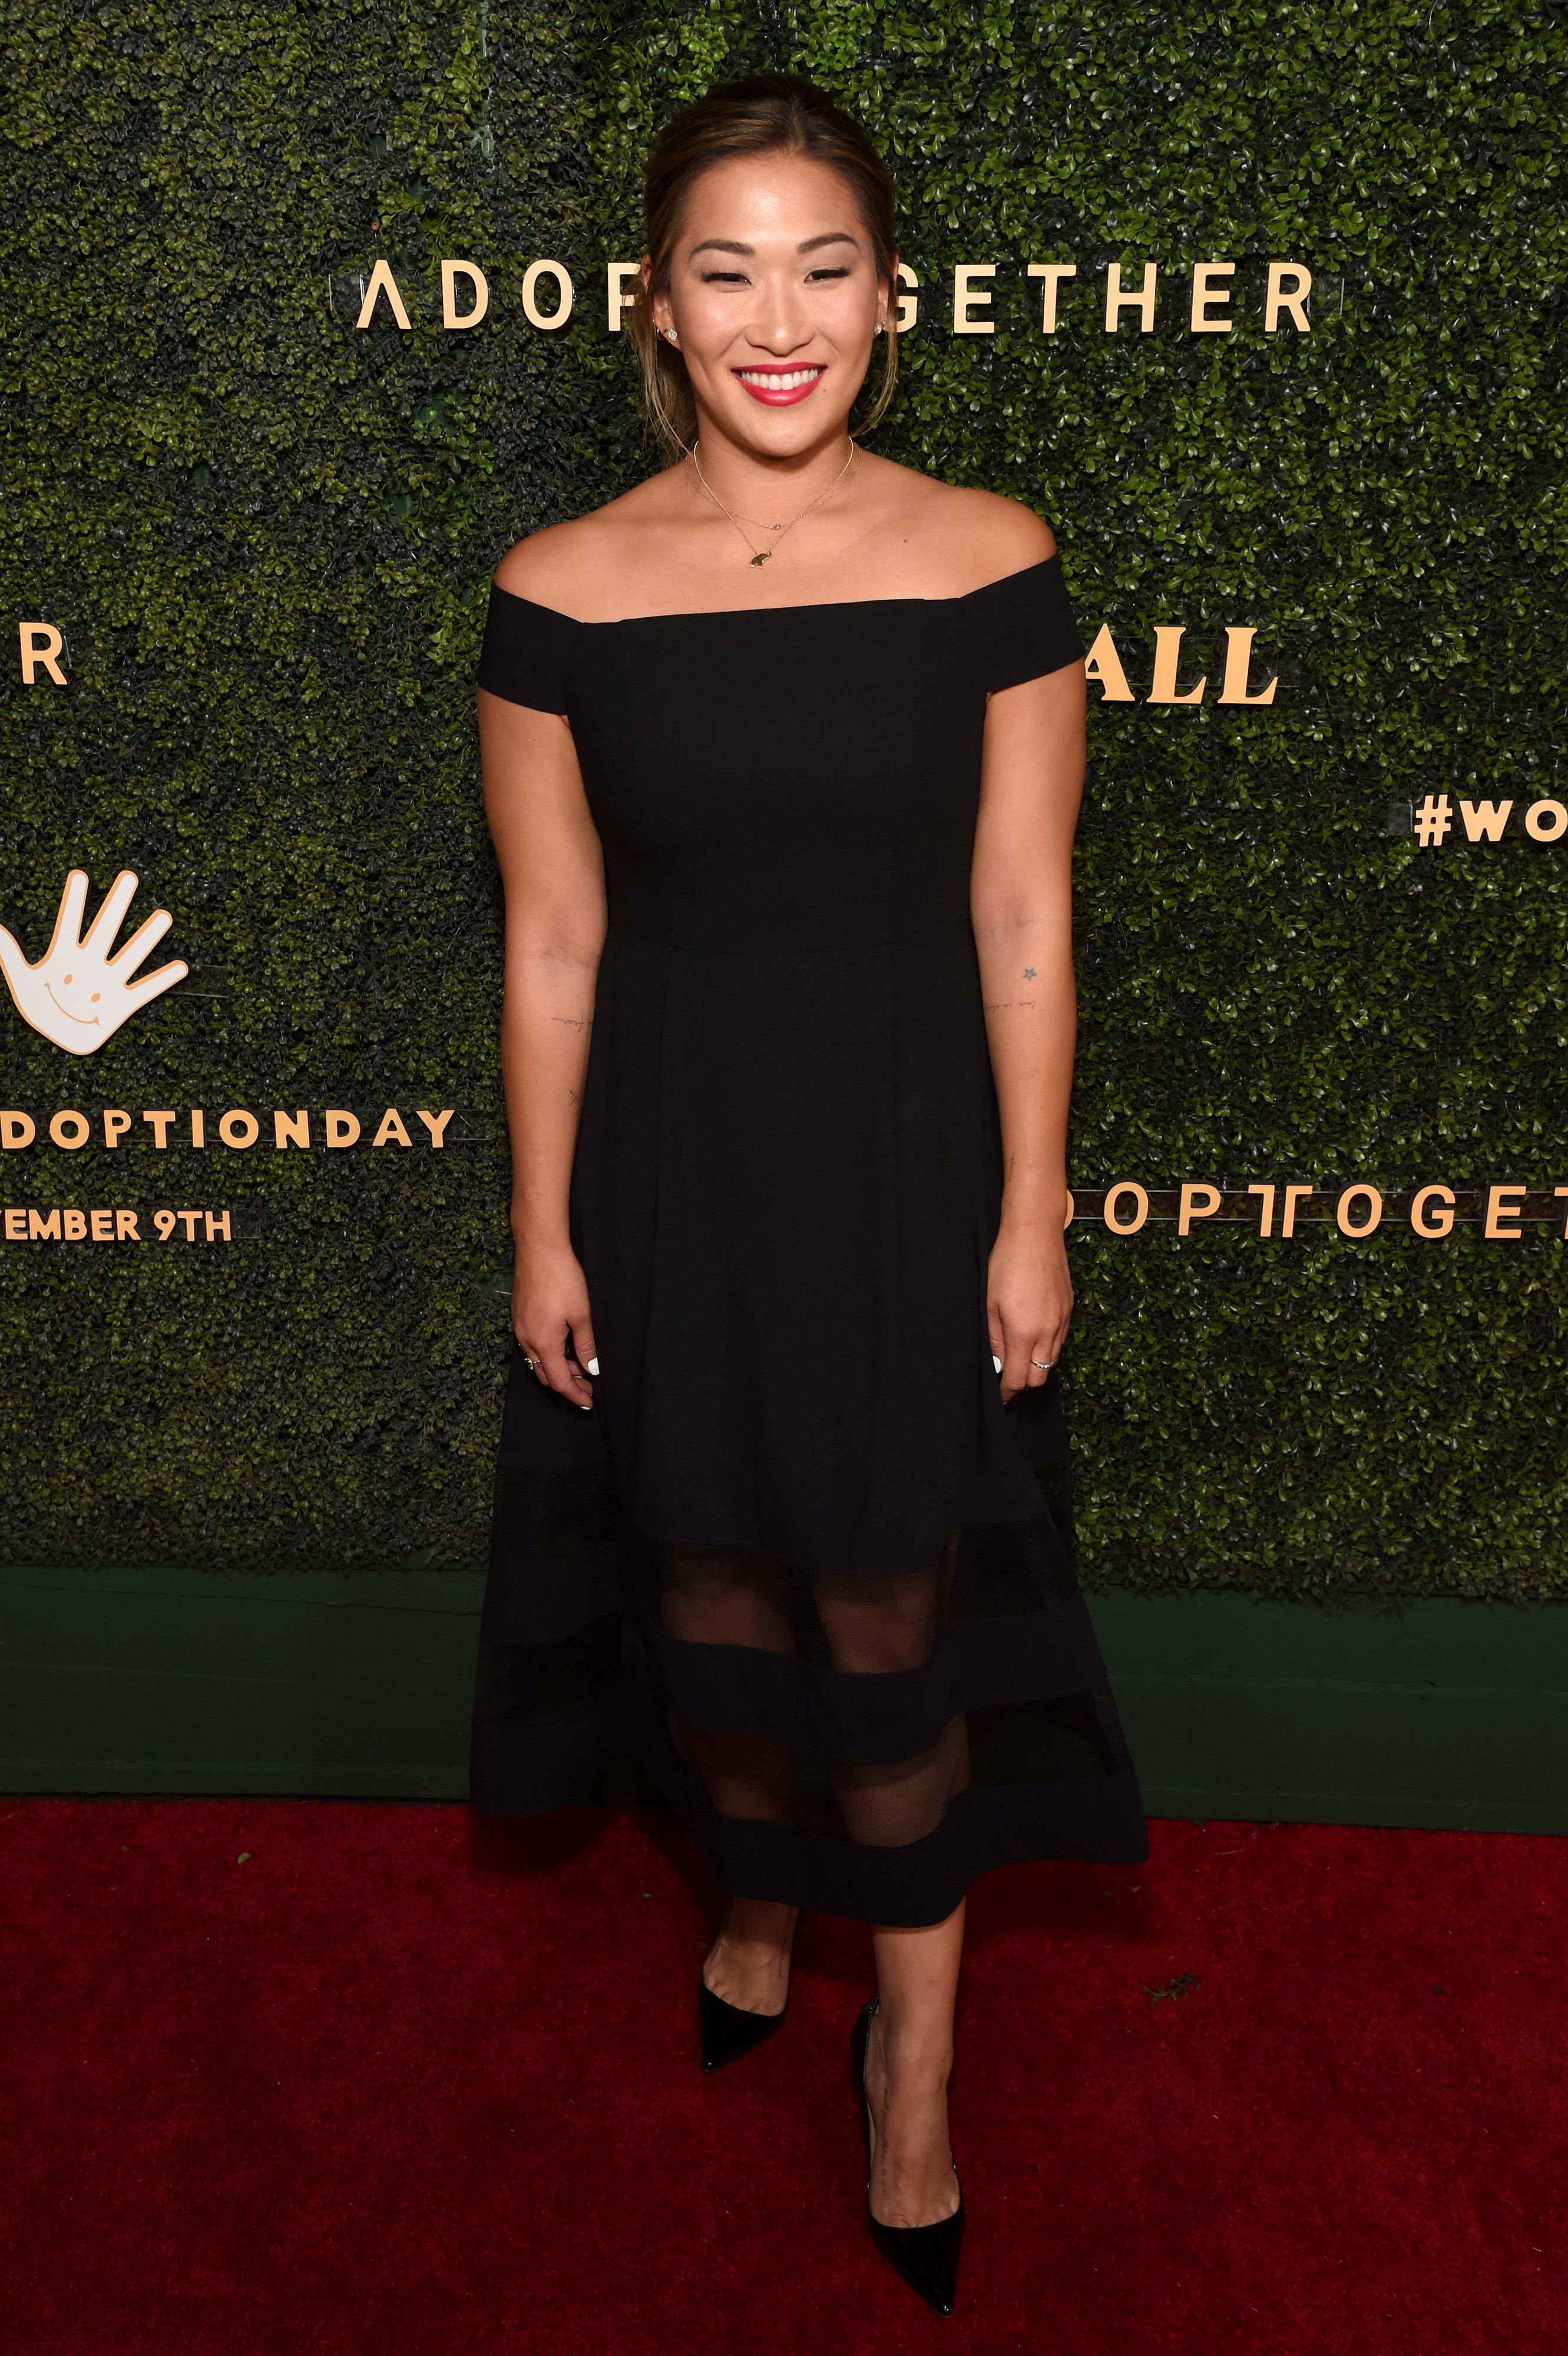 Jenna Ushkowitz at the 5th Adopt Together Baby Ball Gala on October 12, 2019 | Photo: Getty Images